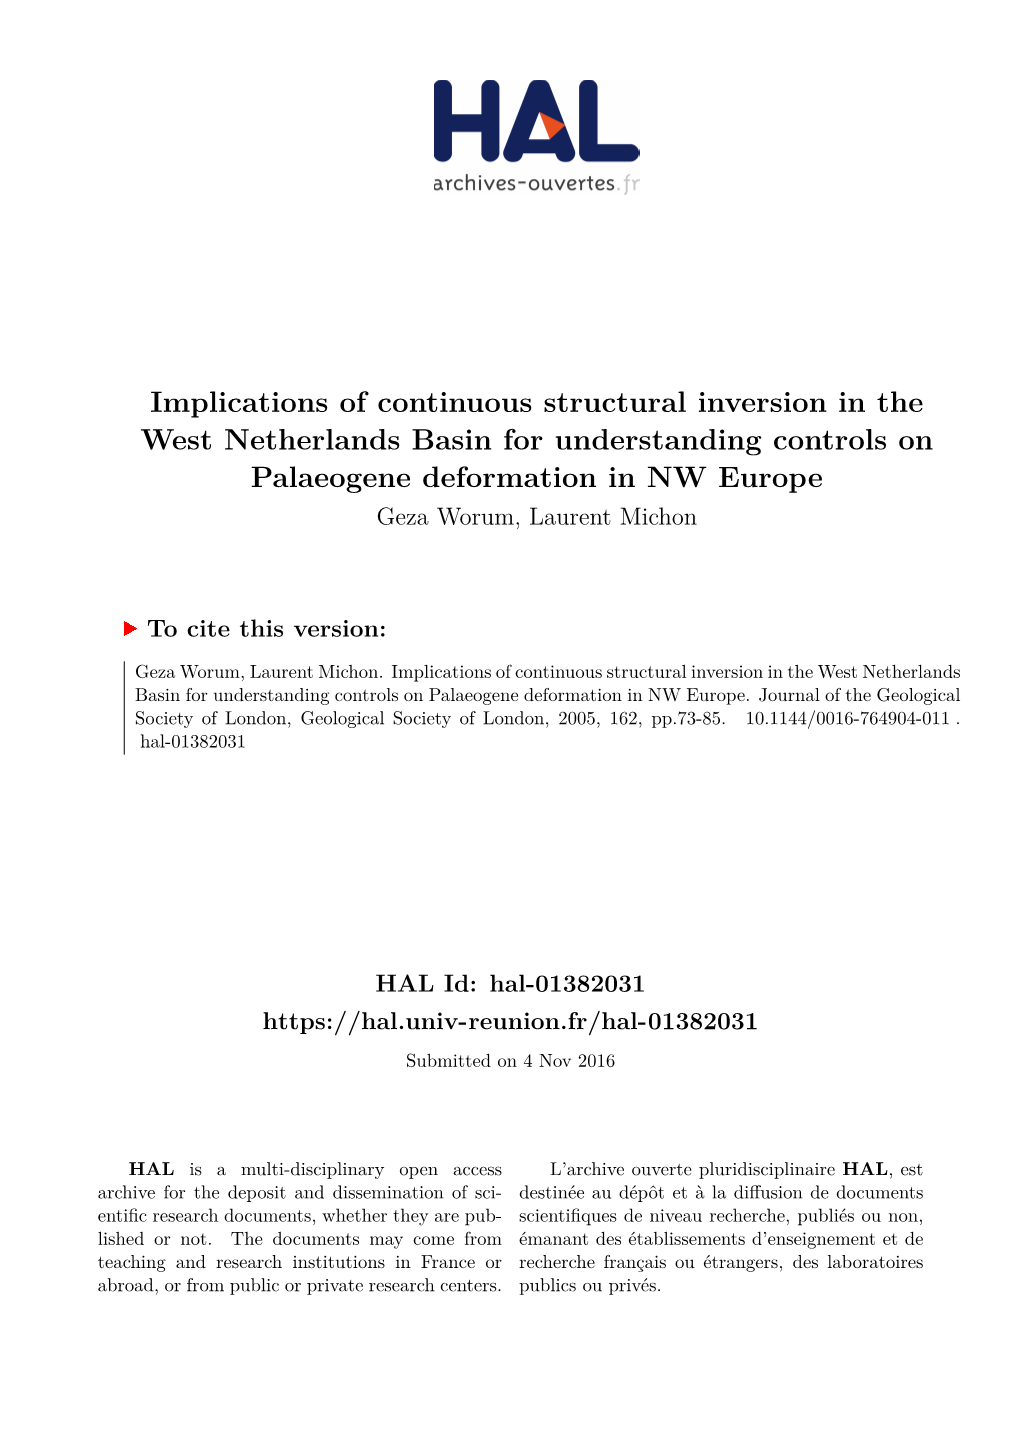 Implications of Continuous Structural Inversion in the West Netherlands